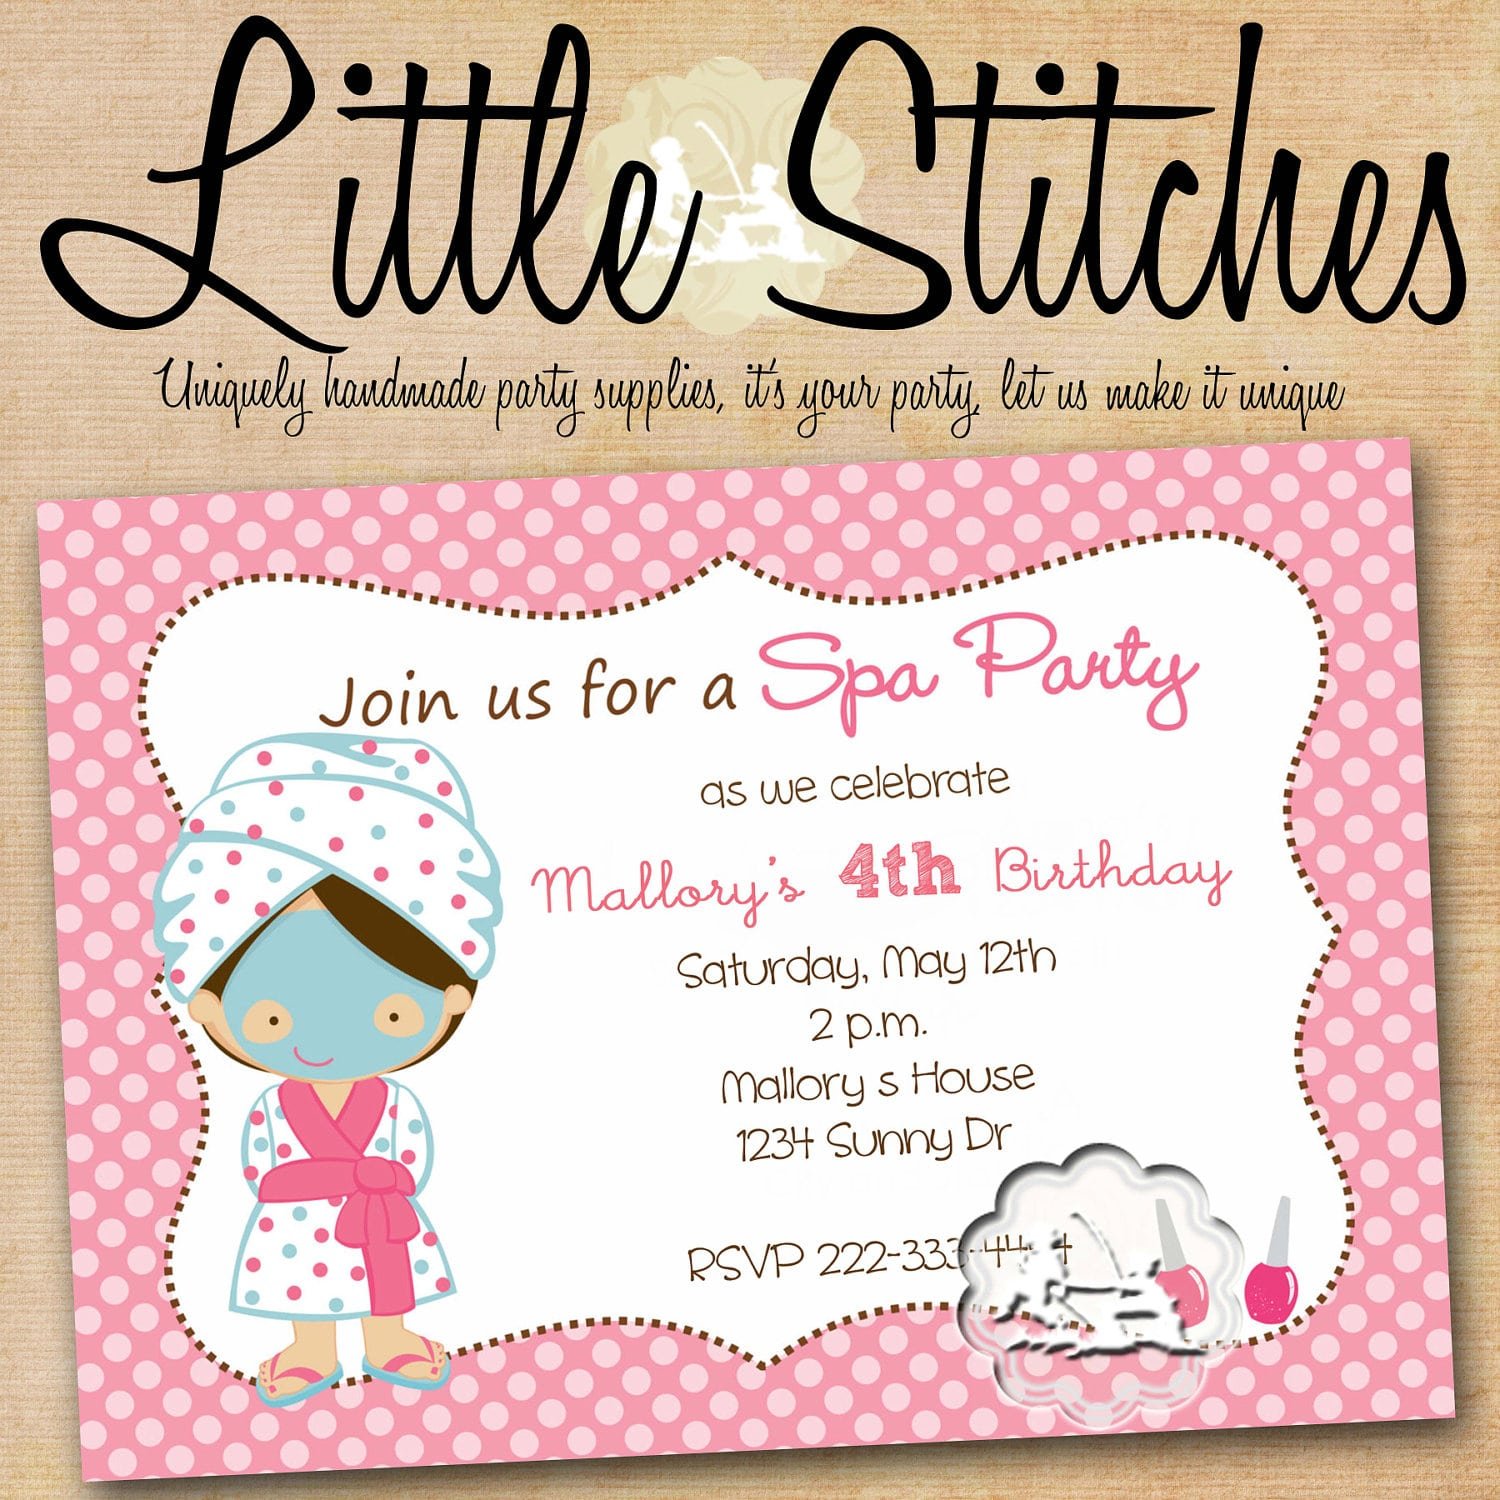 free-printable-birthday-party-invitation-wording-example-for-cathy